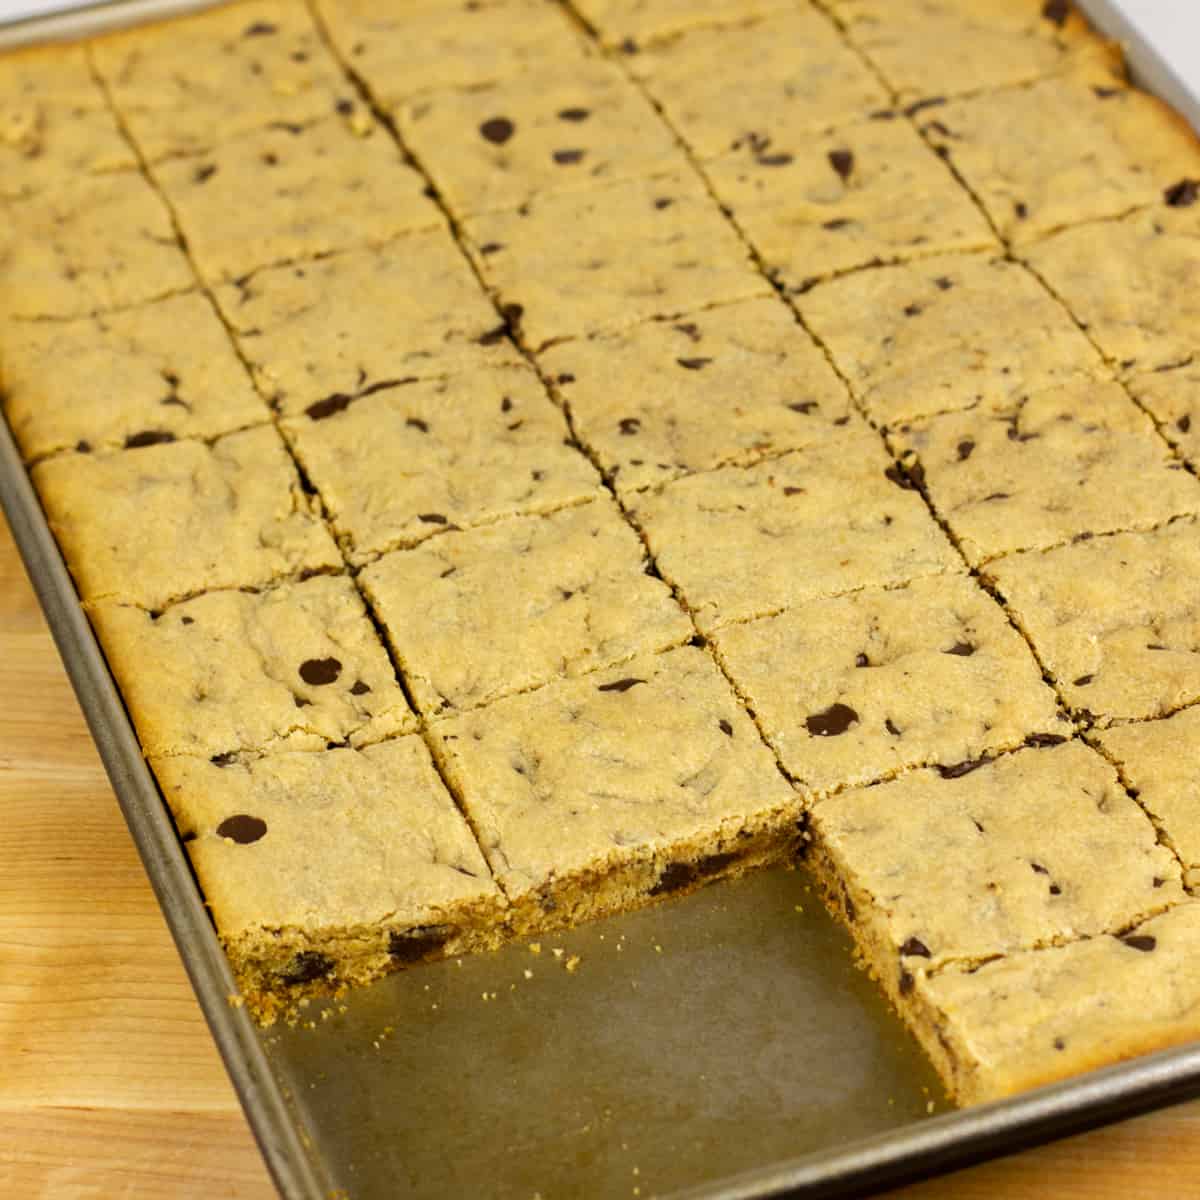 Baked cookie bars cut and divided.